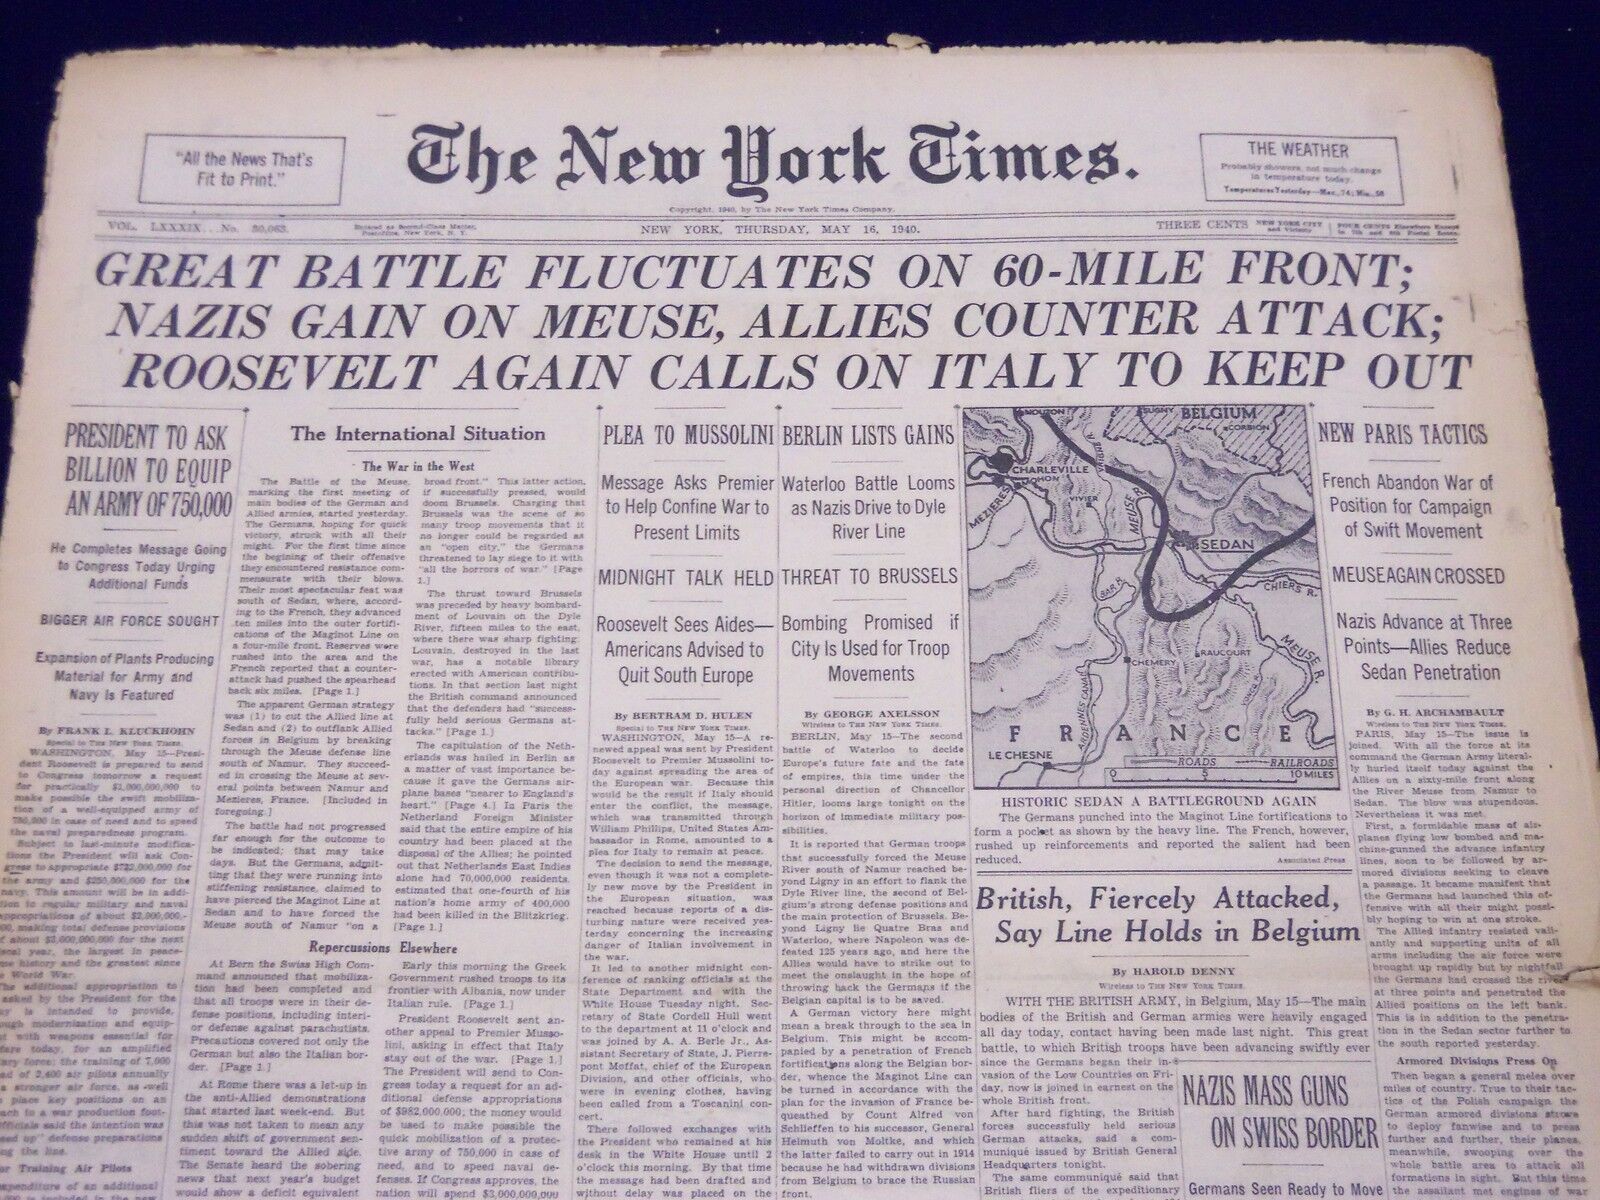 1940 MAY 16 NEW YORK TIMES - GREAT BATTLE FLUCTUATES ON 60-MILE FRONT - NT 184